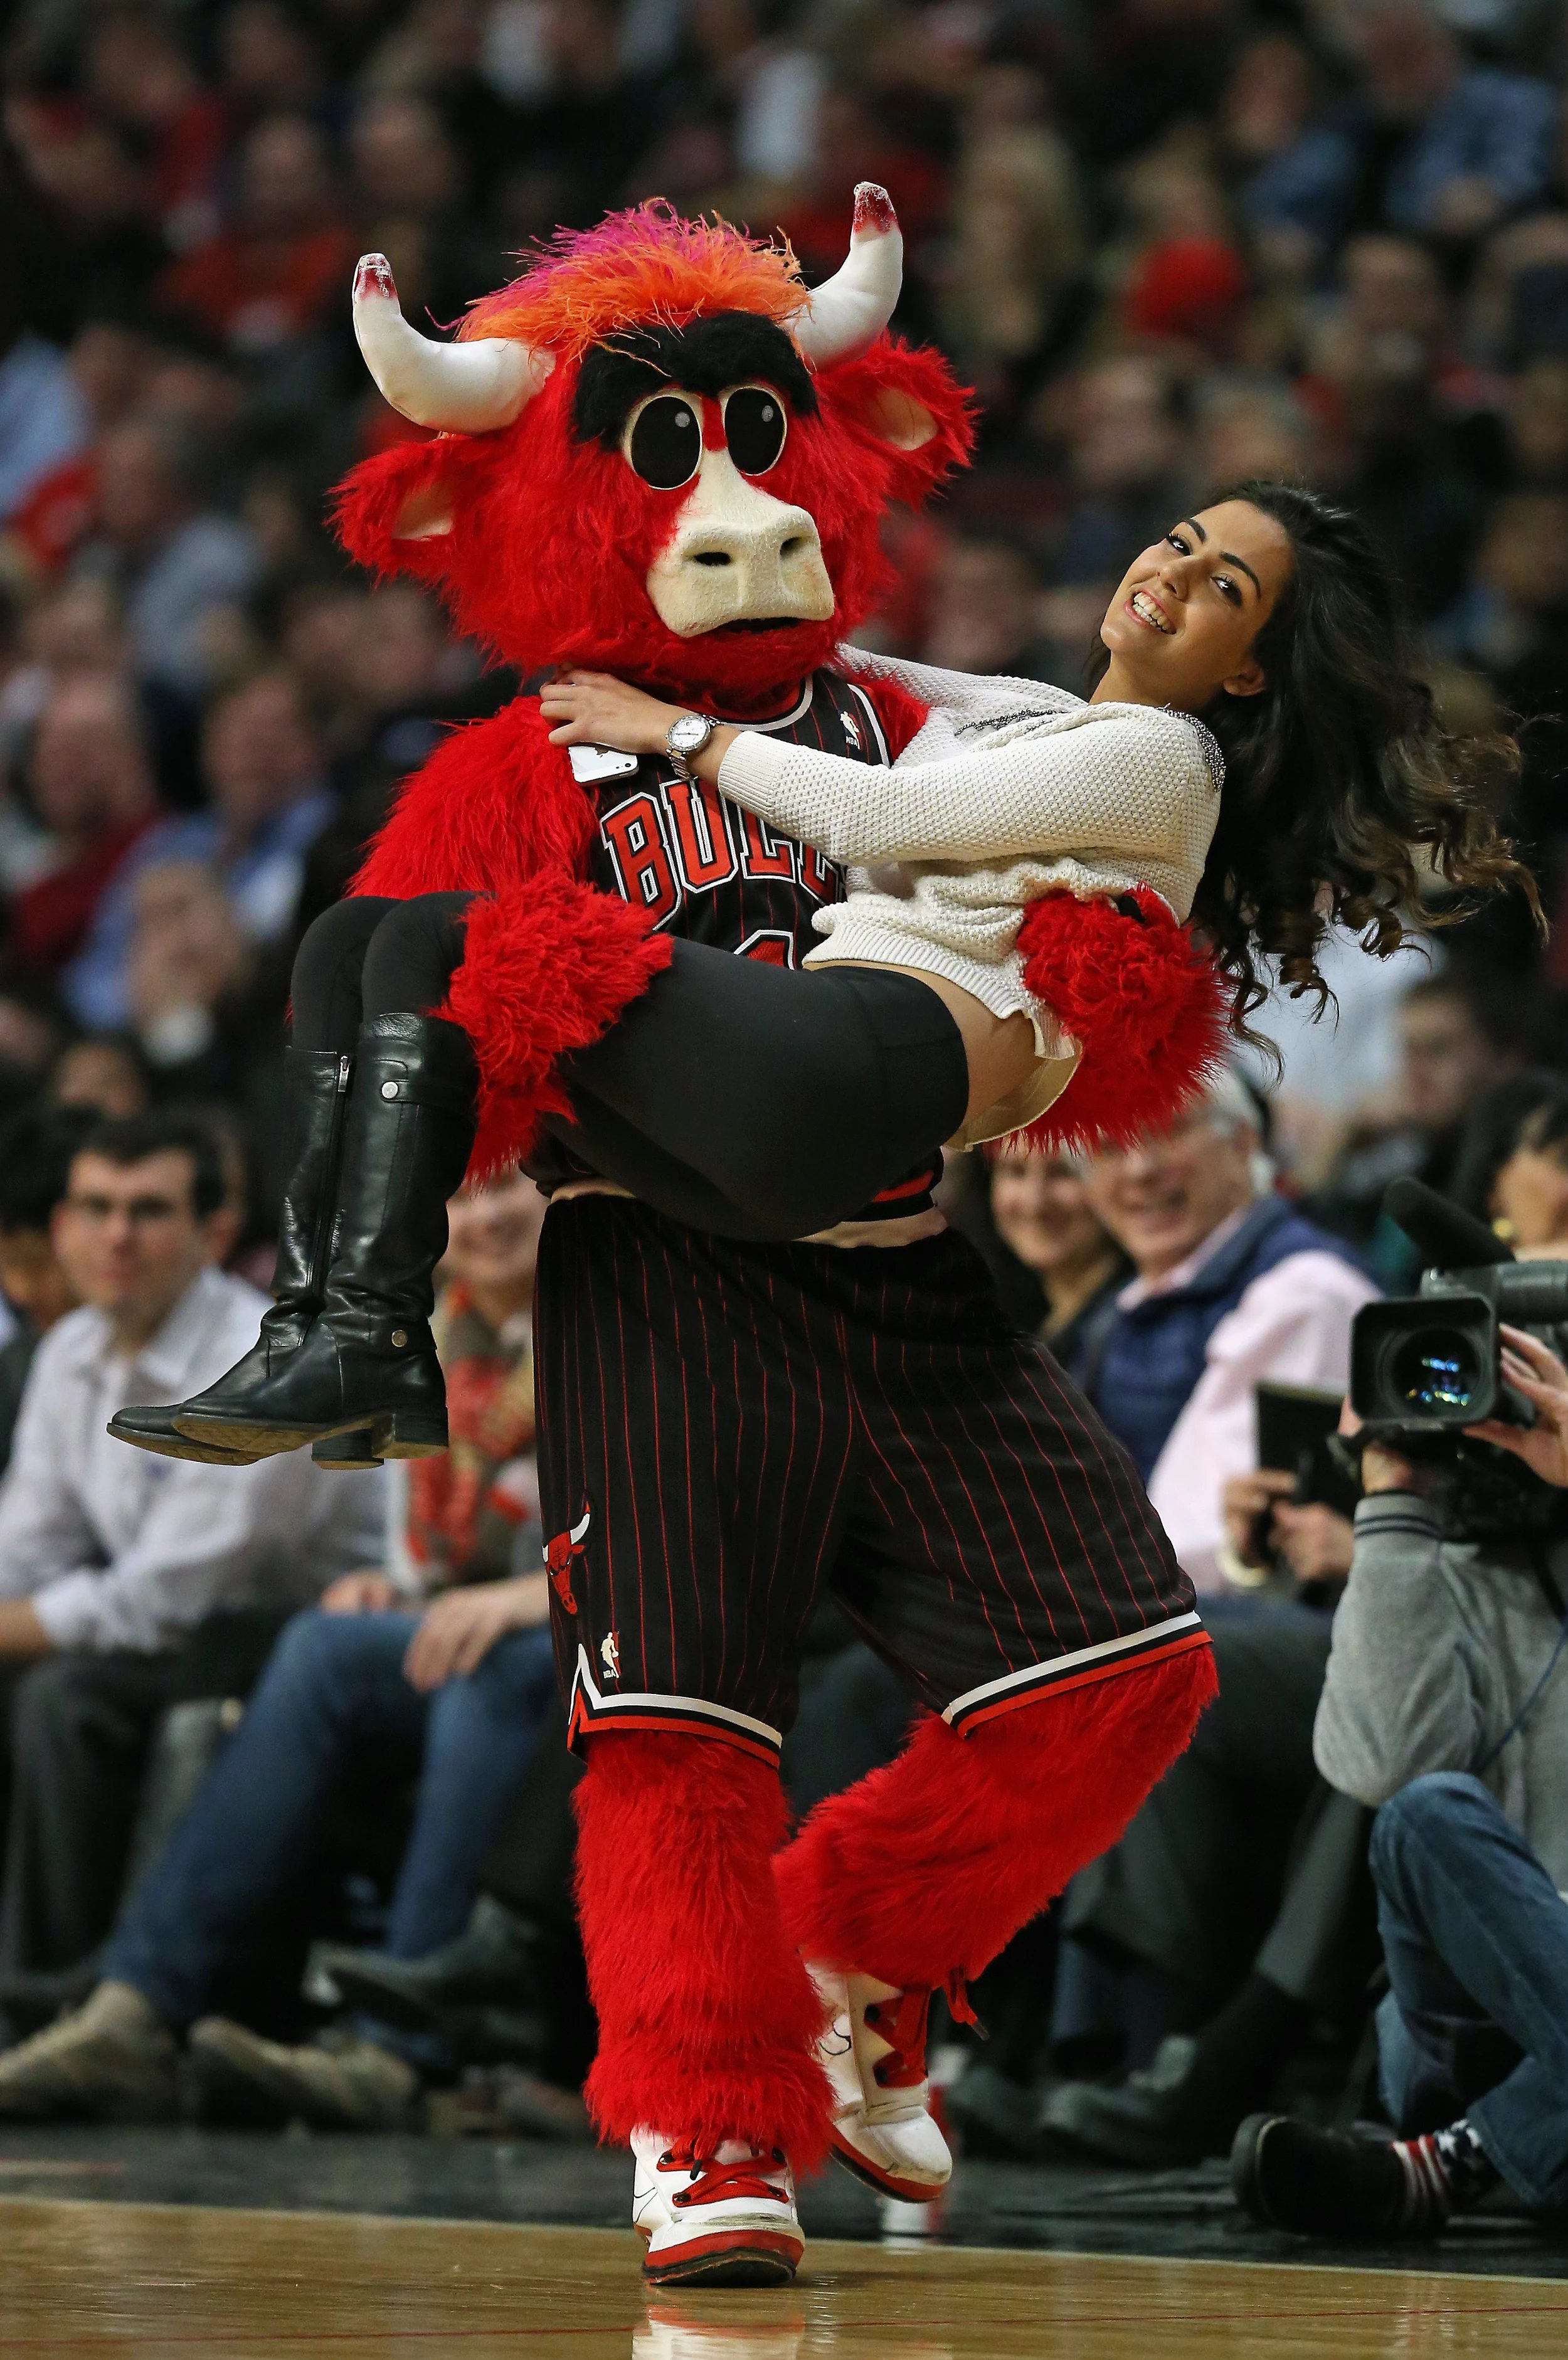 Take a picture with Benny the bull! :)